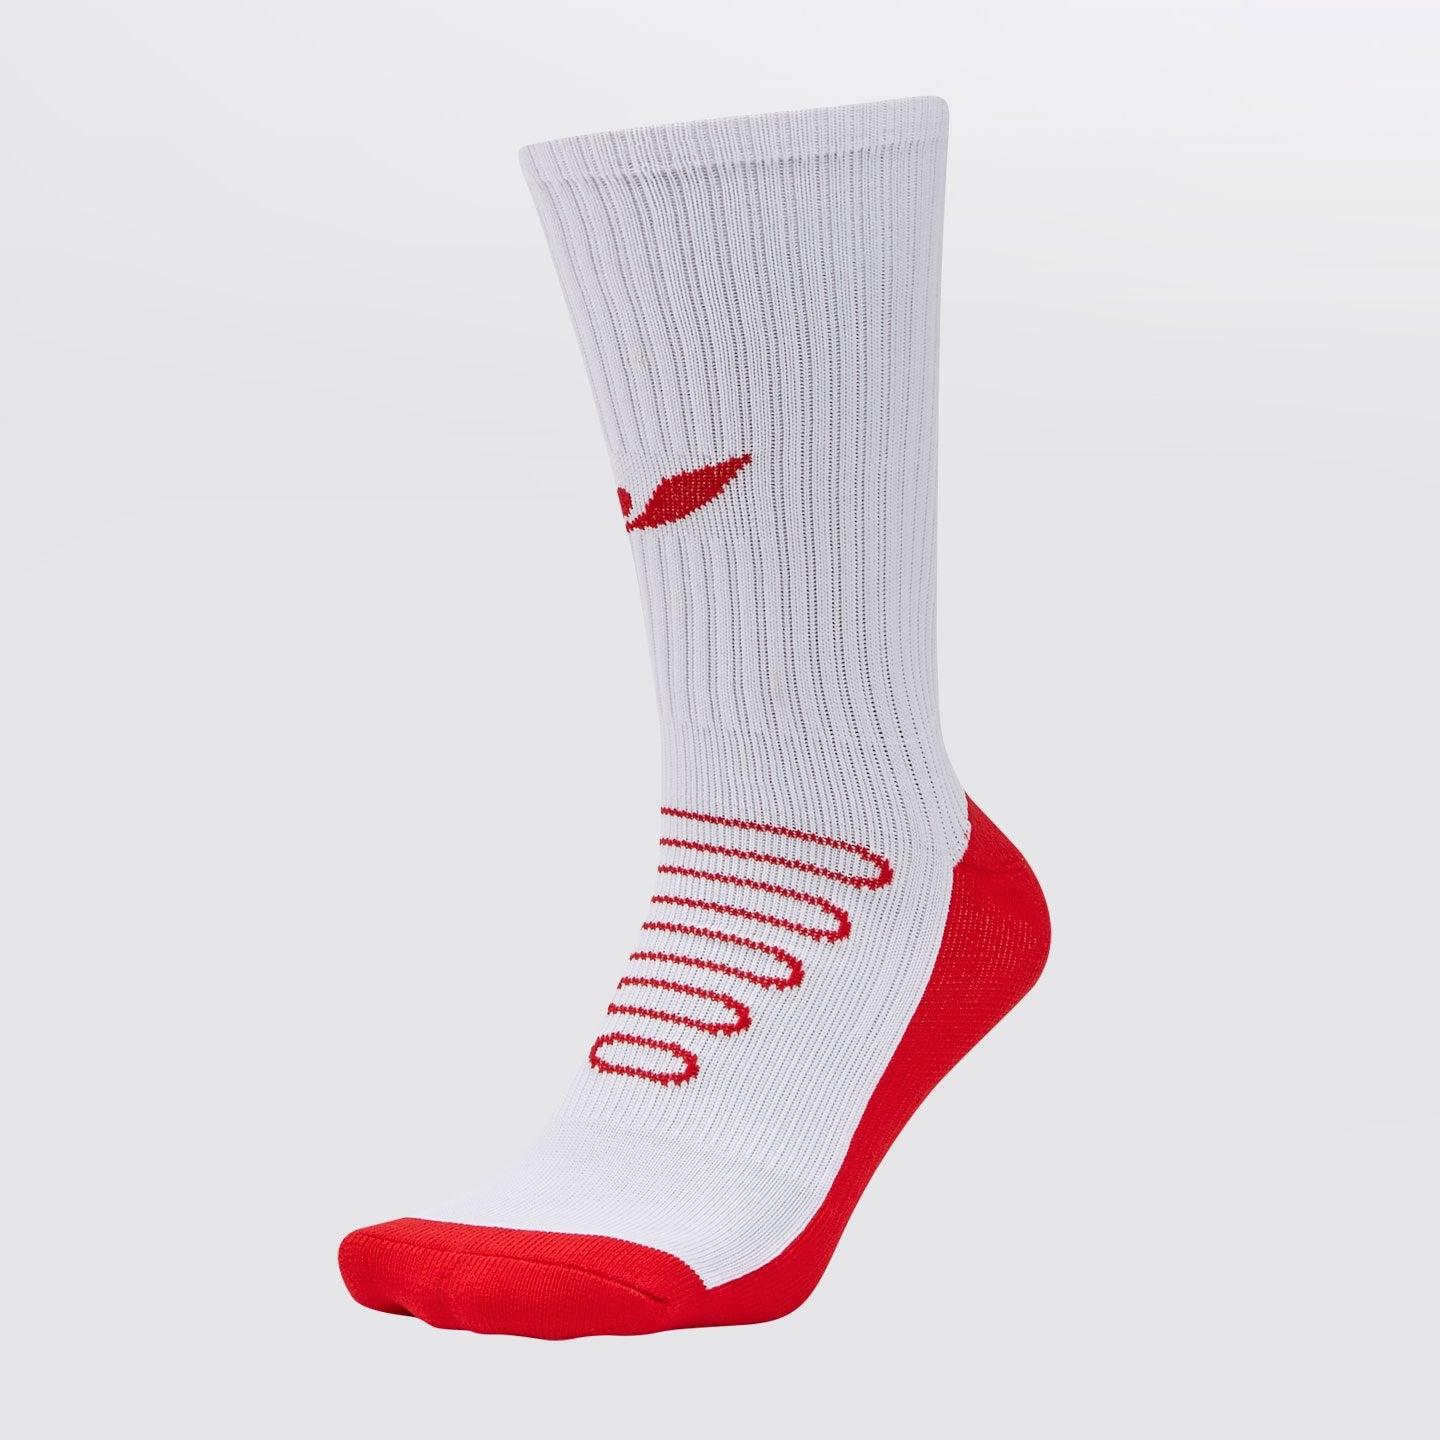 Concave Performance Mid Socks - White/Red